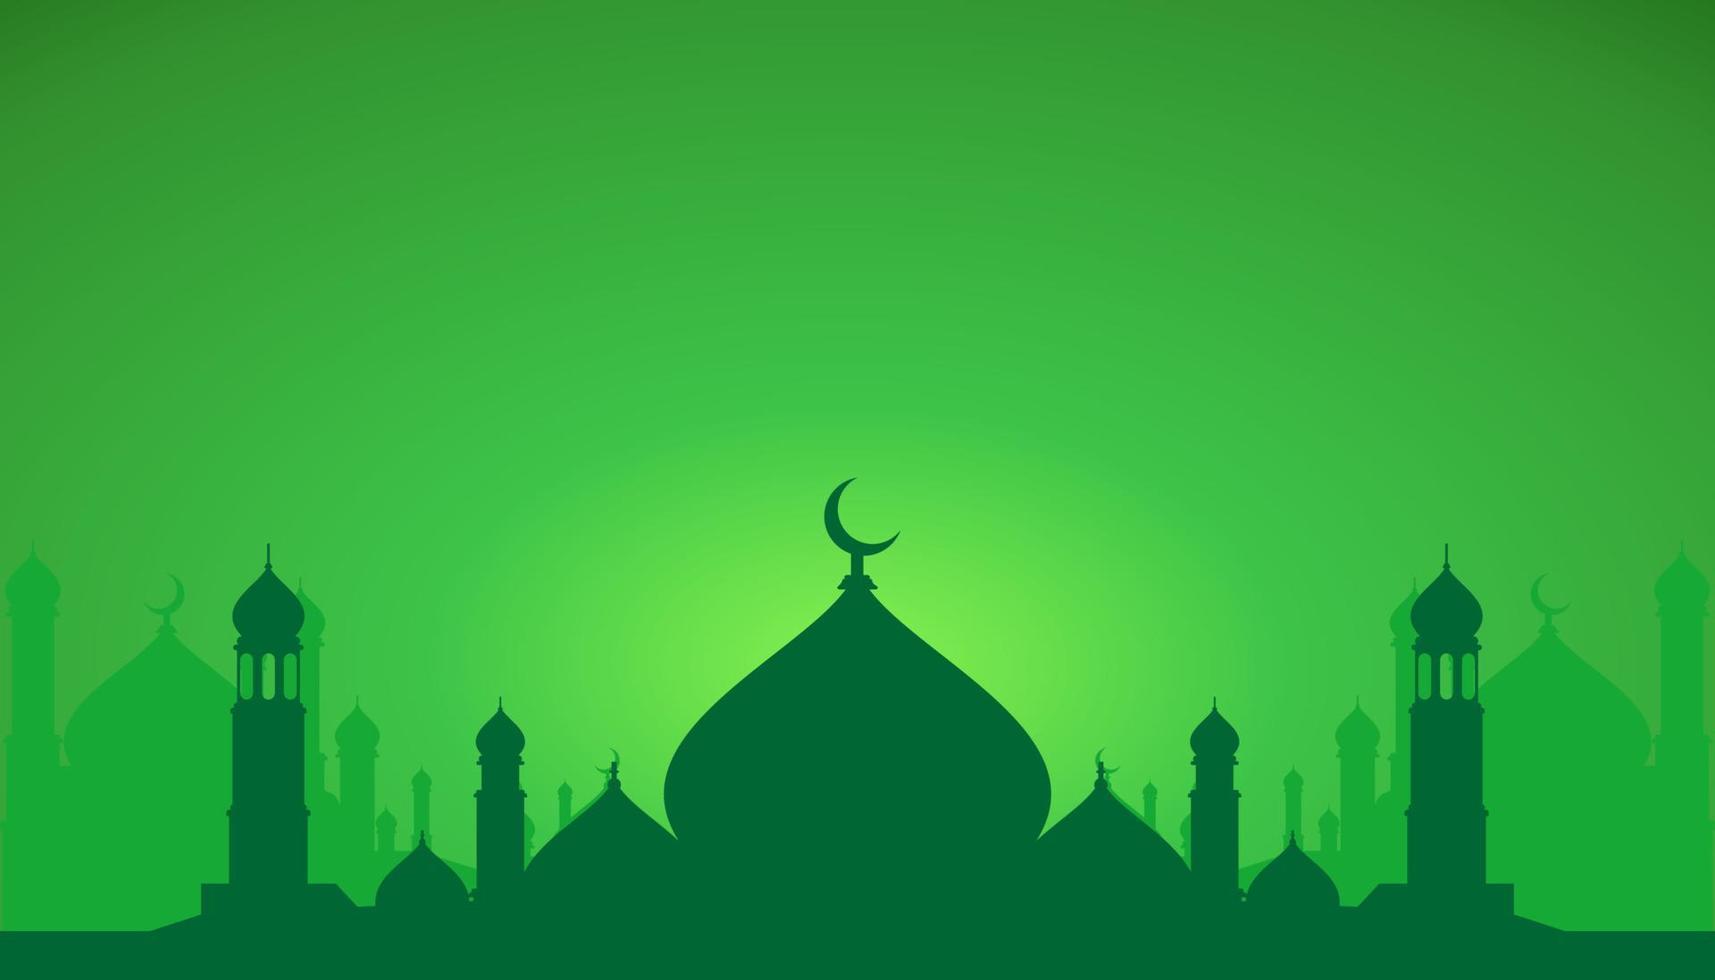 Islamic Mosque Architecture iPhone Wallpapers - Wallpaper Cave